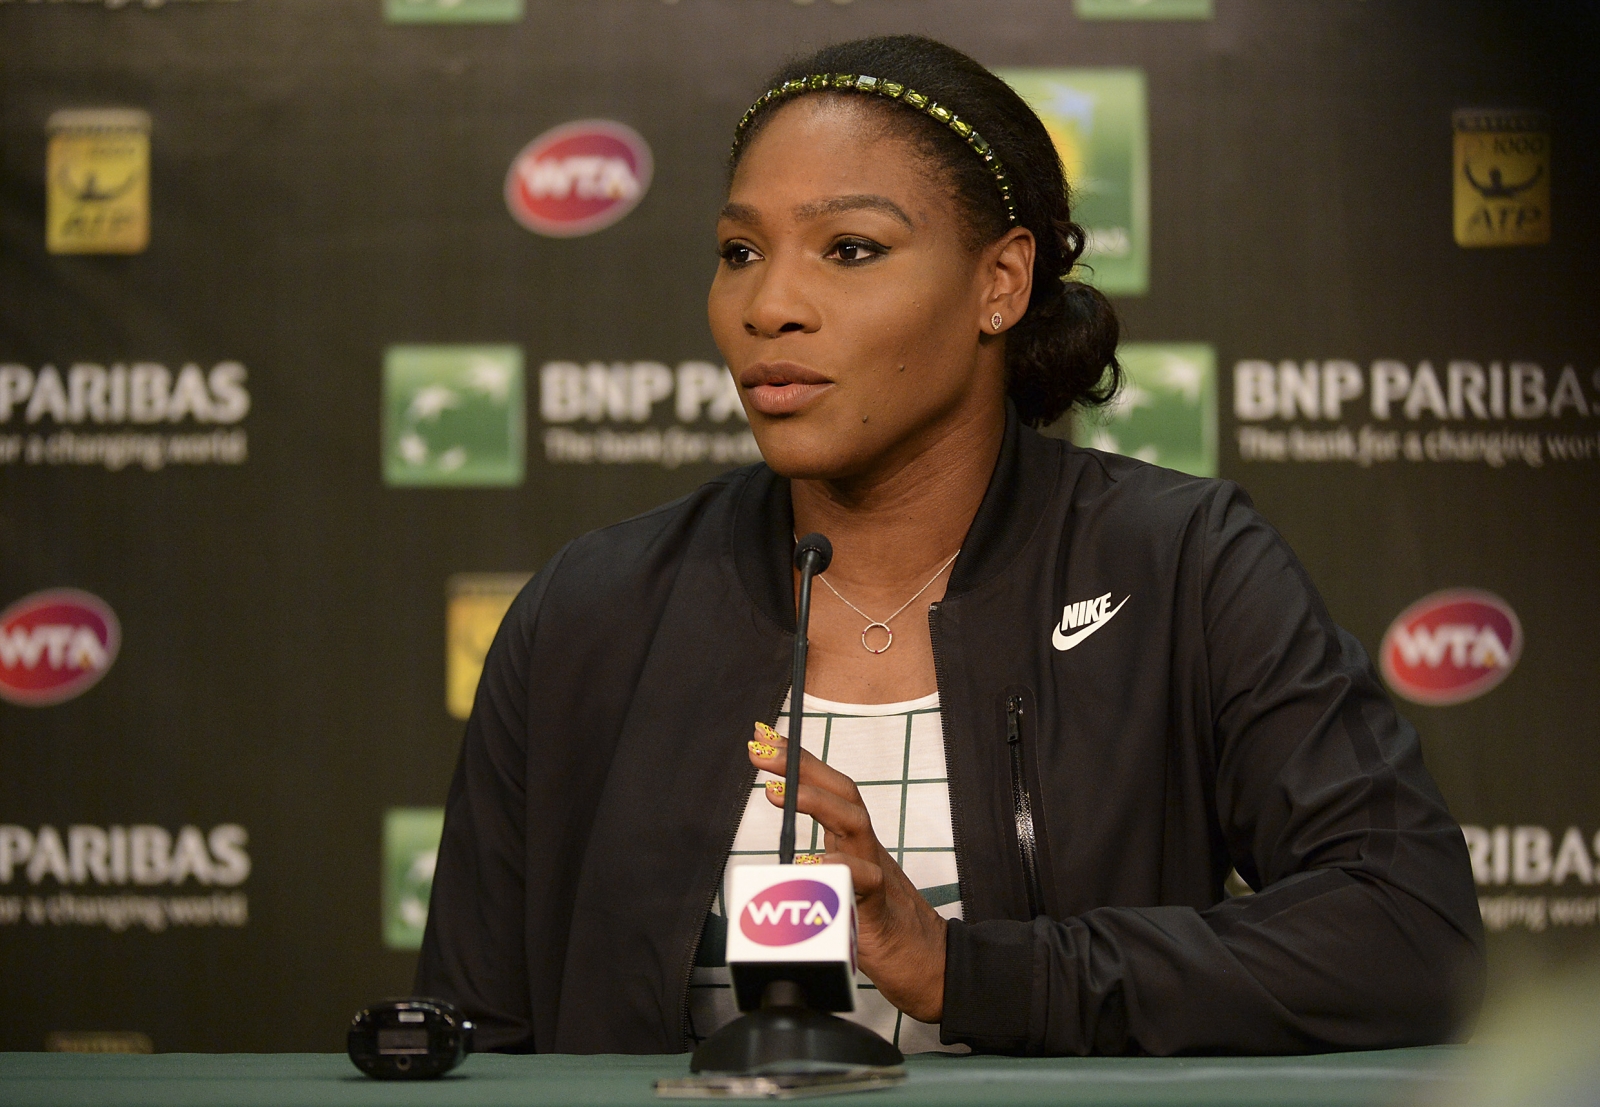 Serena Williams to end Indian Wells boycott after 2001 racist abuse1600 x 1107